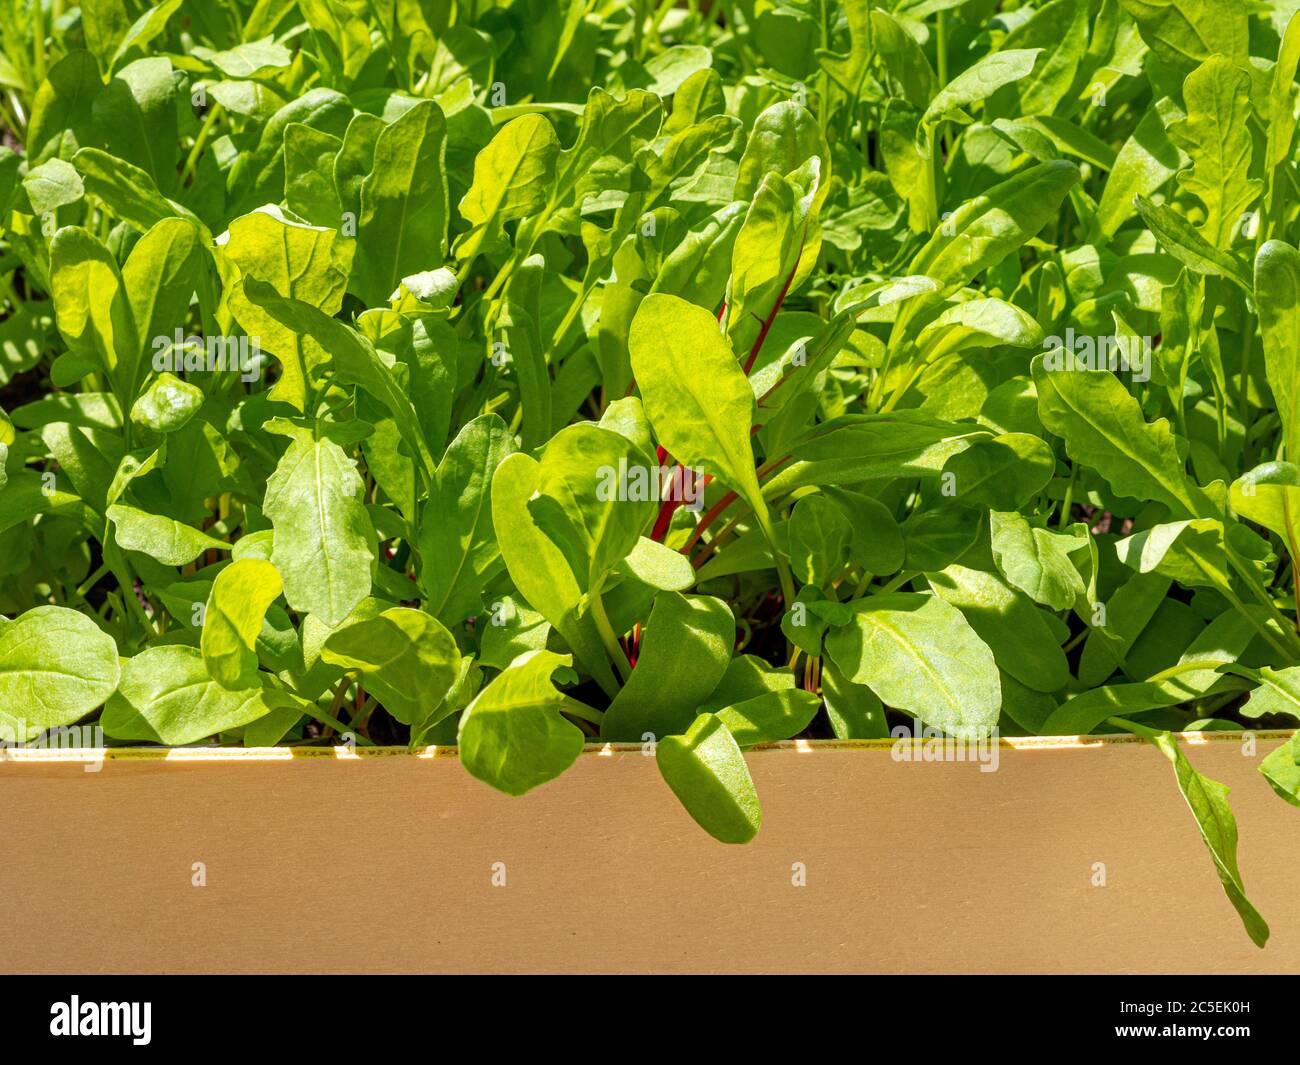 Mixed salad leaves growing in a recycled wooden vegetable box. Stock Photo